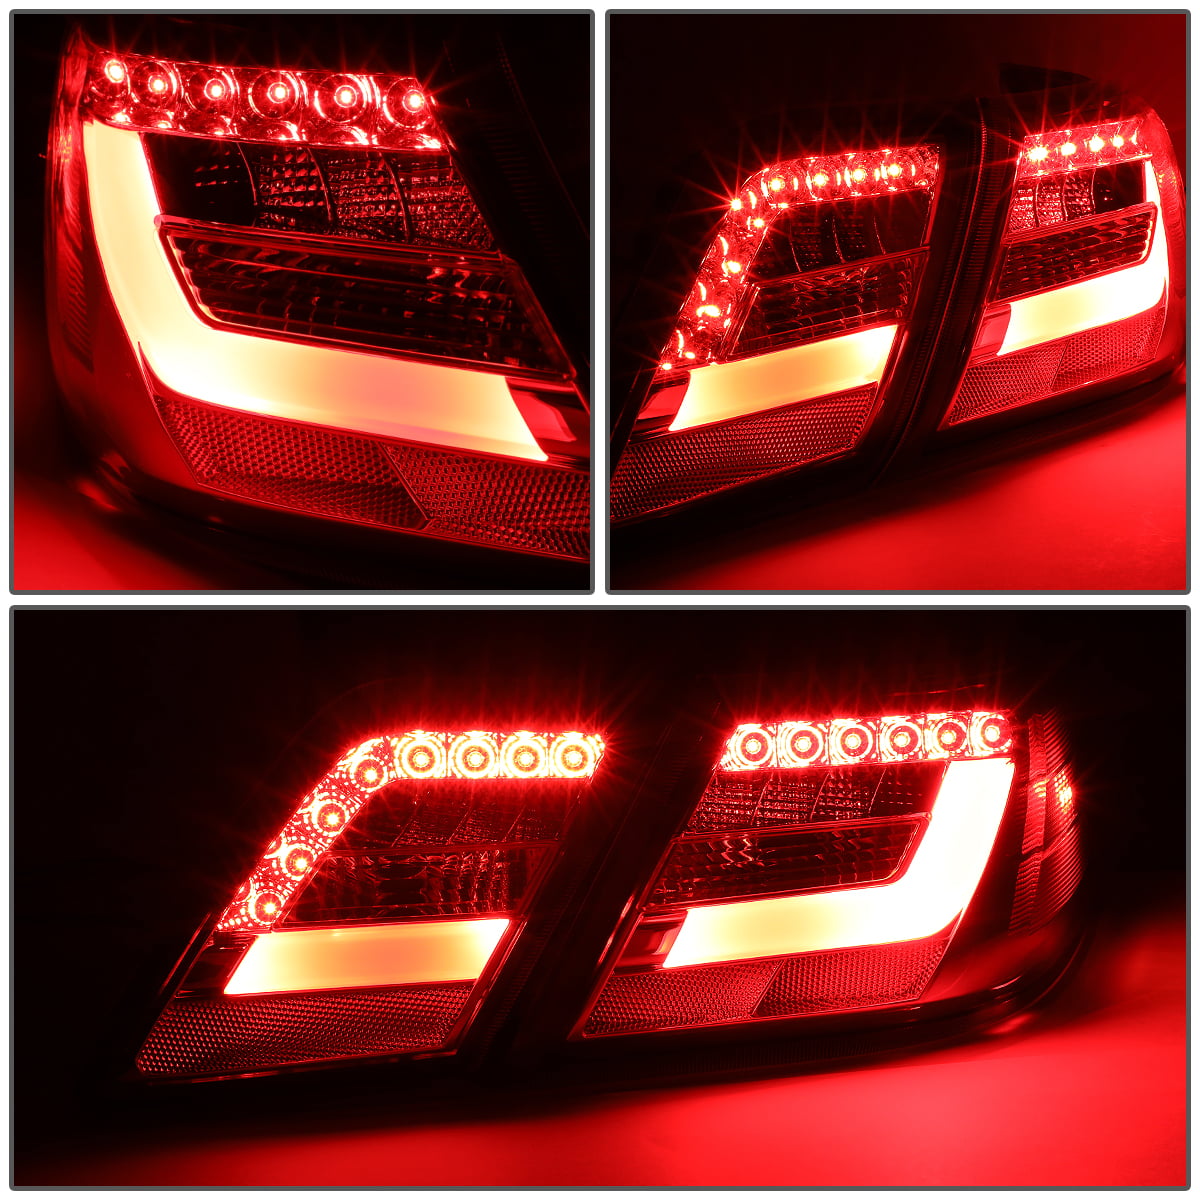 DNA Motoring TL-3DLB-TCAM12-SM Pair 3D LED Bar Tail Light/Lamps For 12-14 Camry 